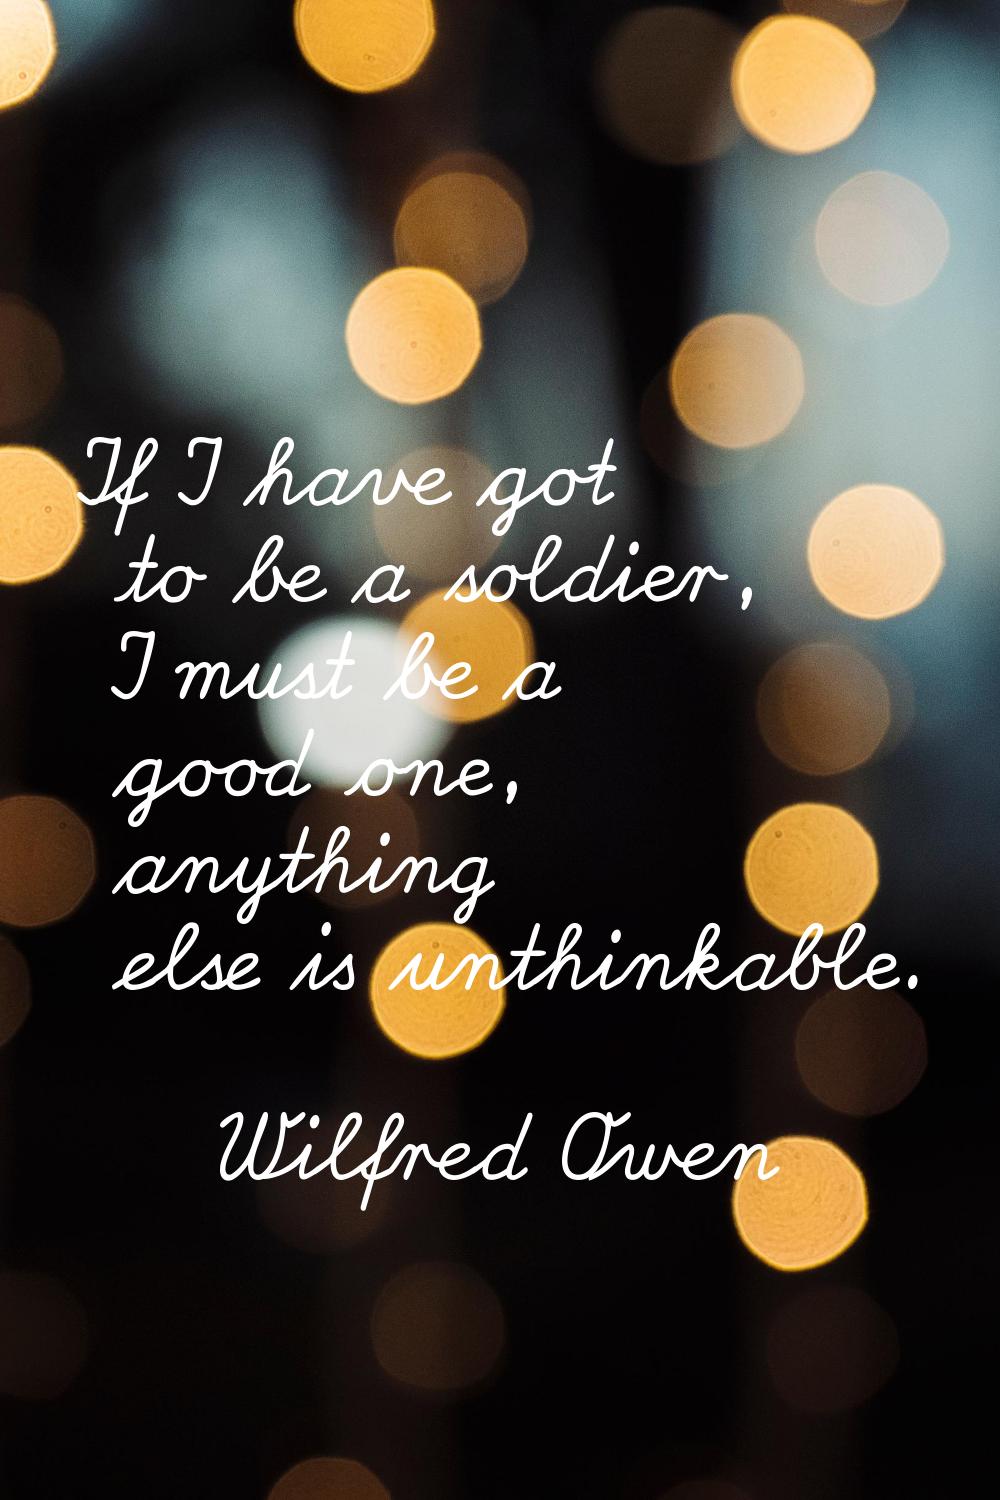 If I have got to be a soldier, I must be a good one, anything else is unthinkable.